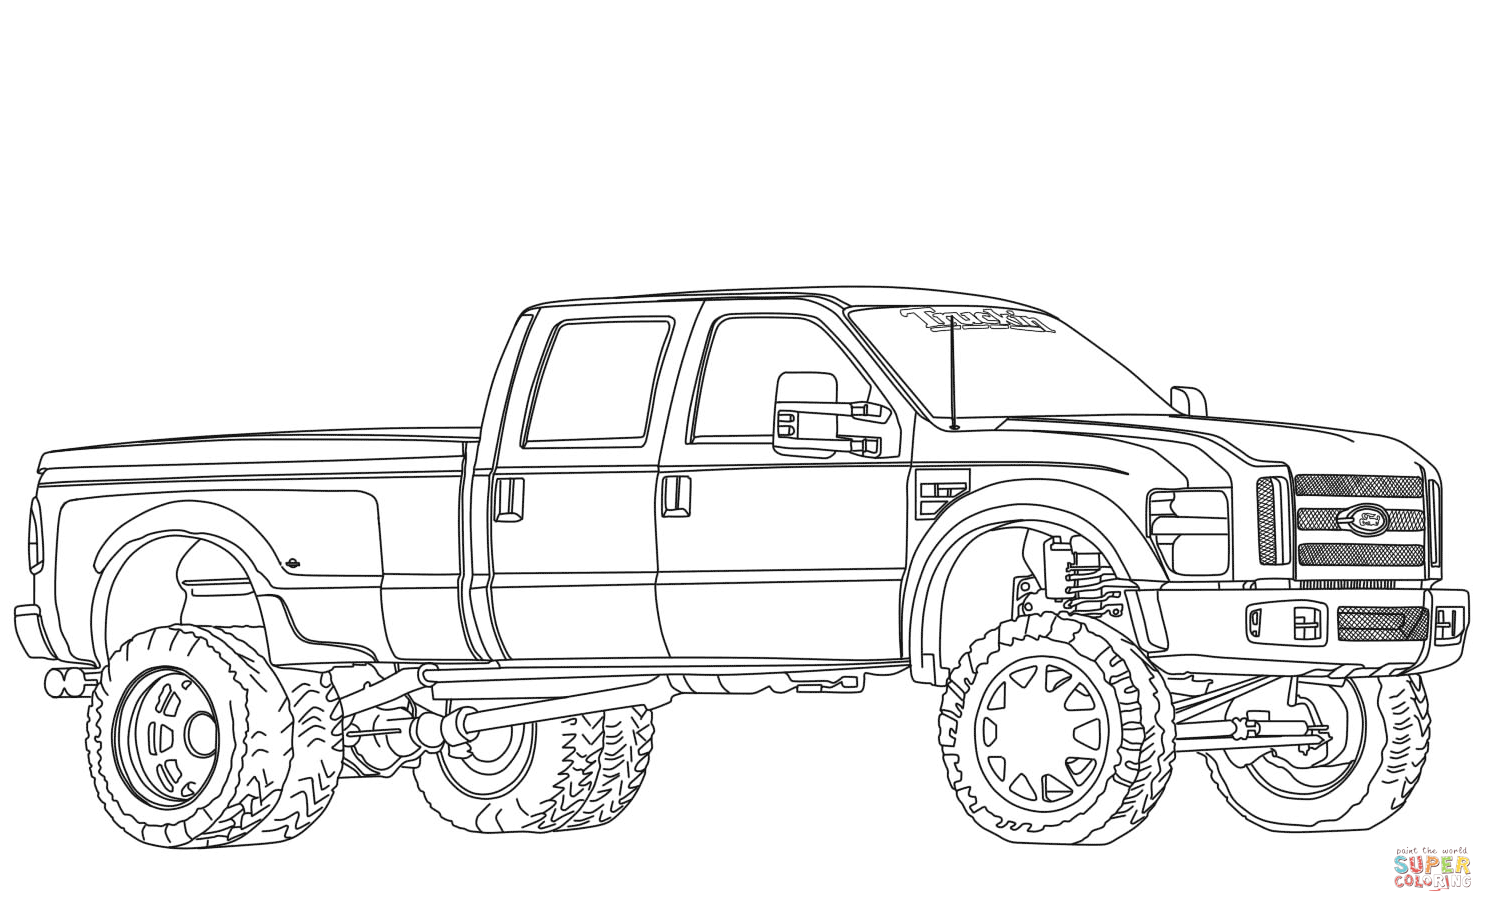 Ford f dually lifted coloring page free printable coloring pages truck coloring pages cars coloring pages monster truck coloring pages